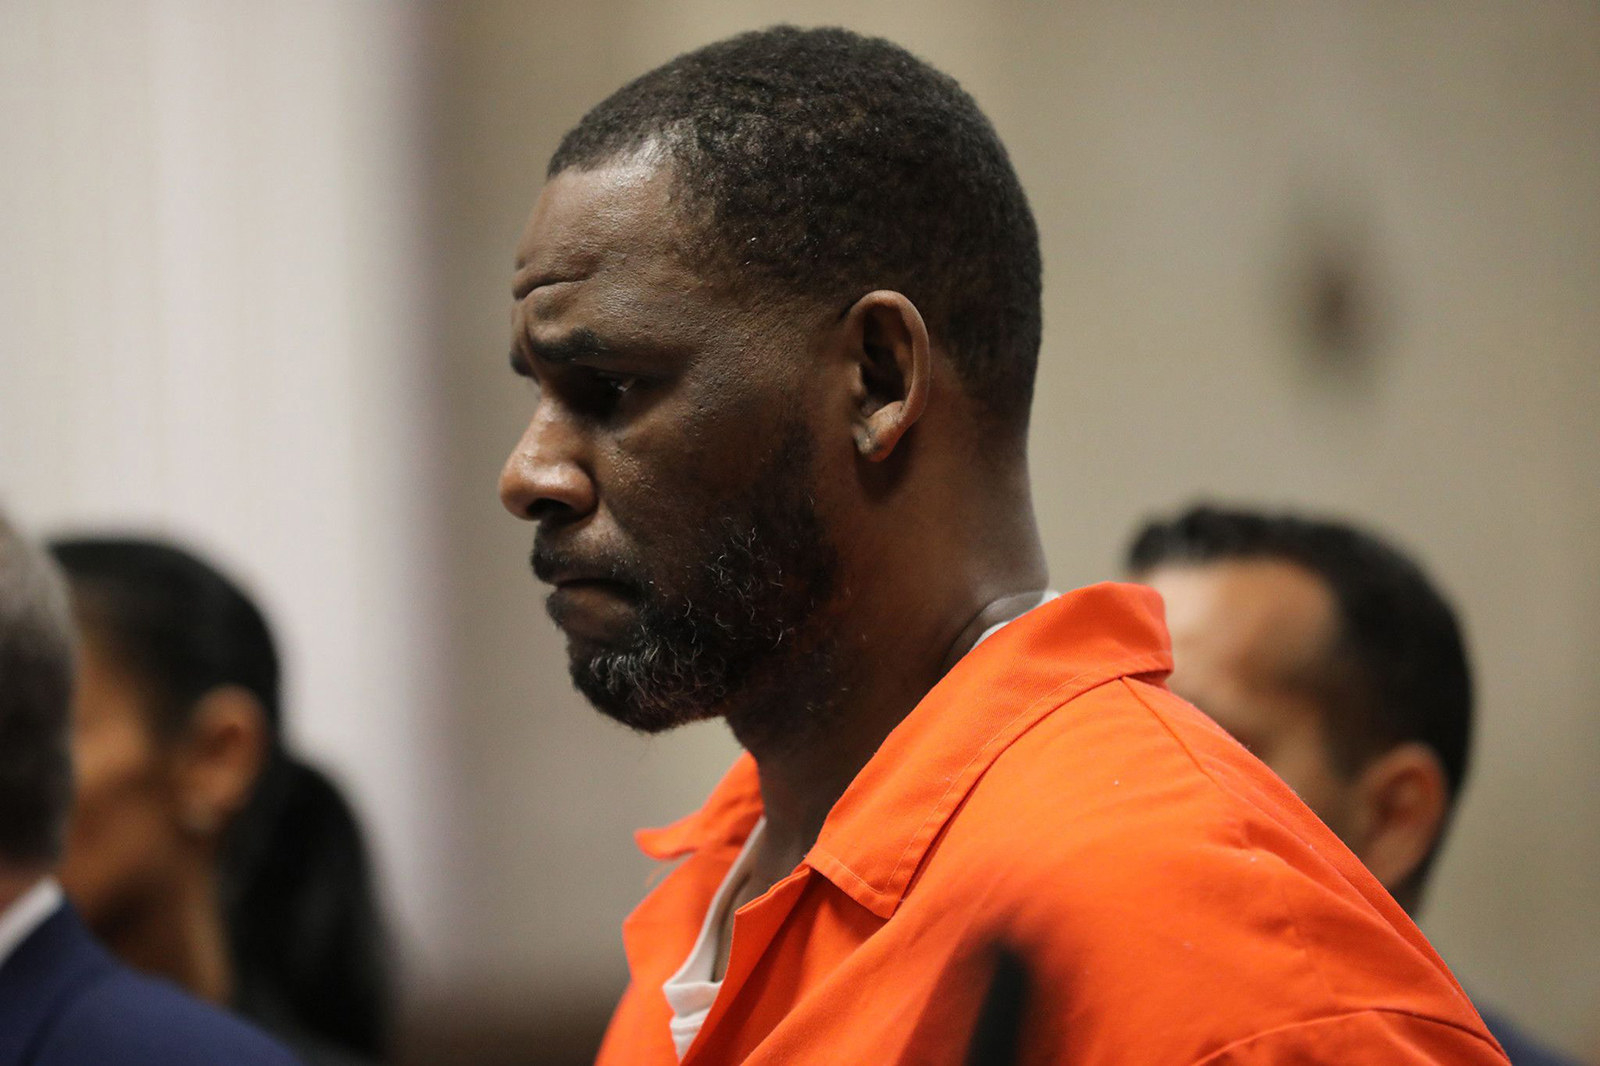 R. Kelly appears during a hearing at the Leighton Criminal Courthouse on Sept. 17, 2019, in Chicago